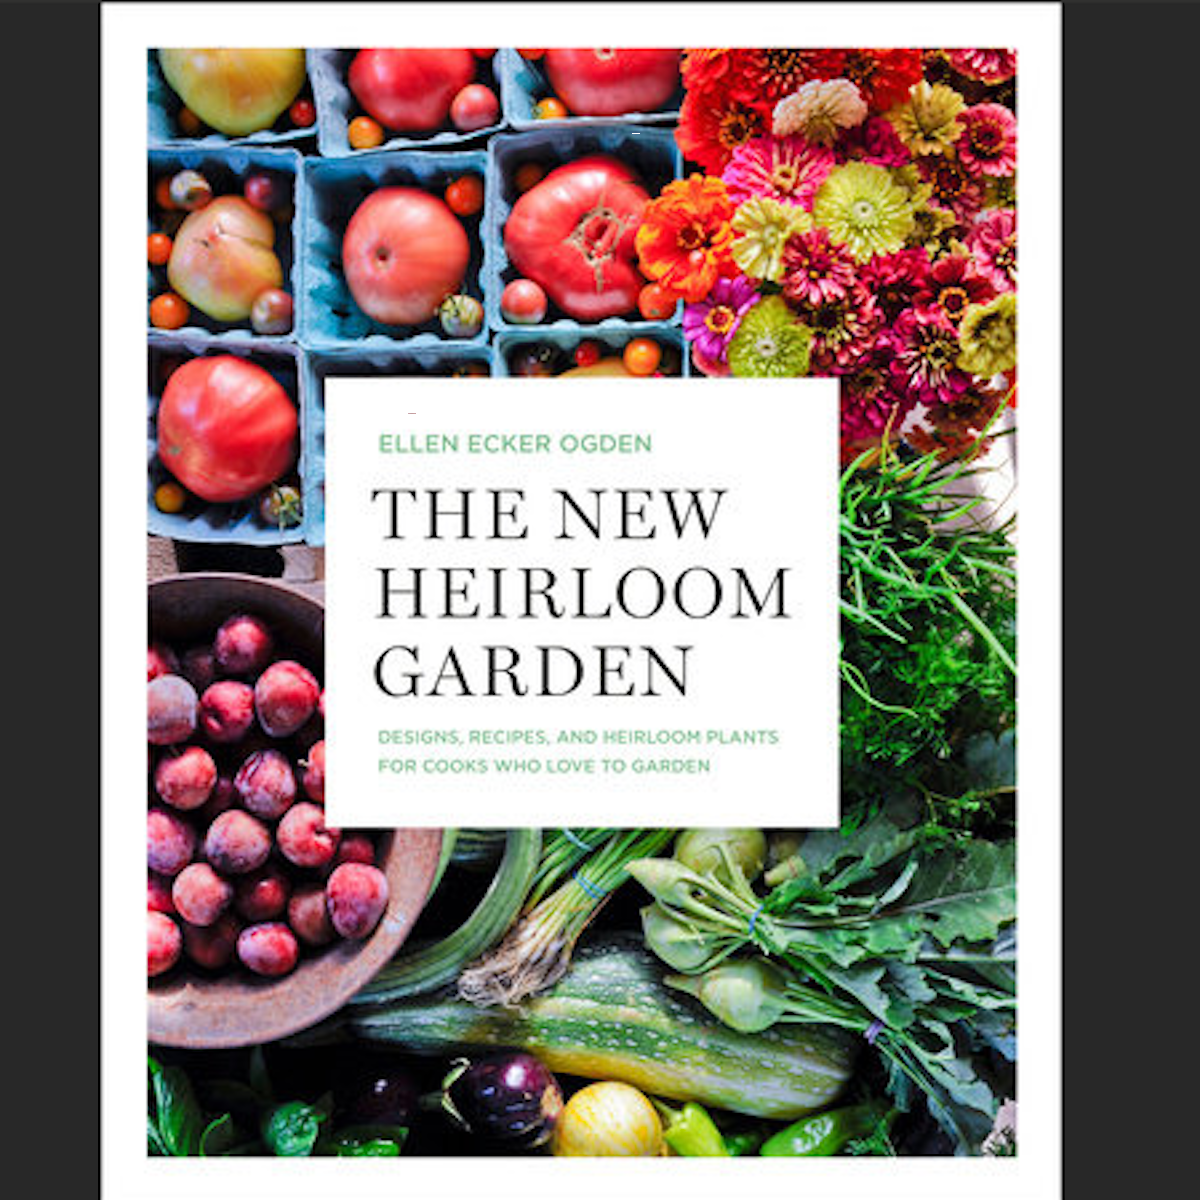 The New Heirloom Garden Designs, Recipes, and Heirloom Plants for Cooks Who Love to Garden